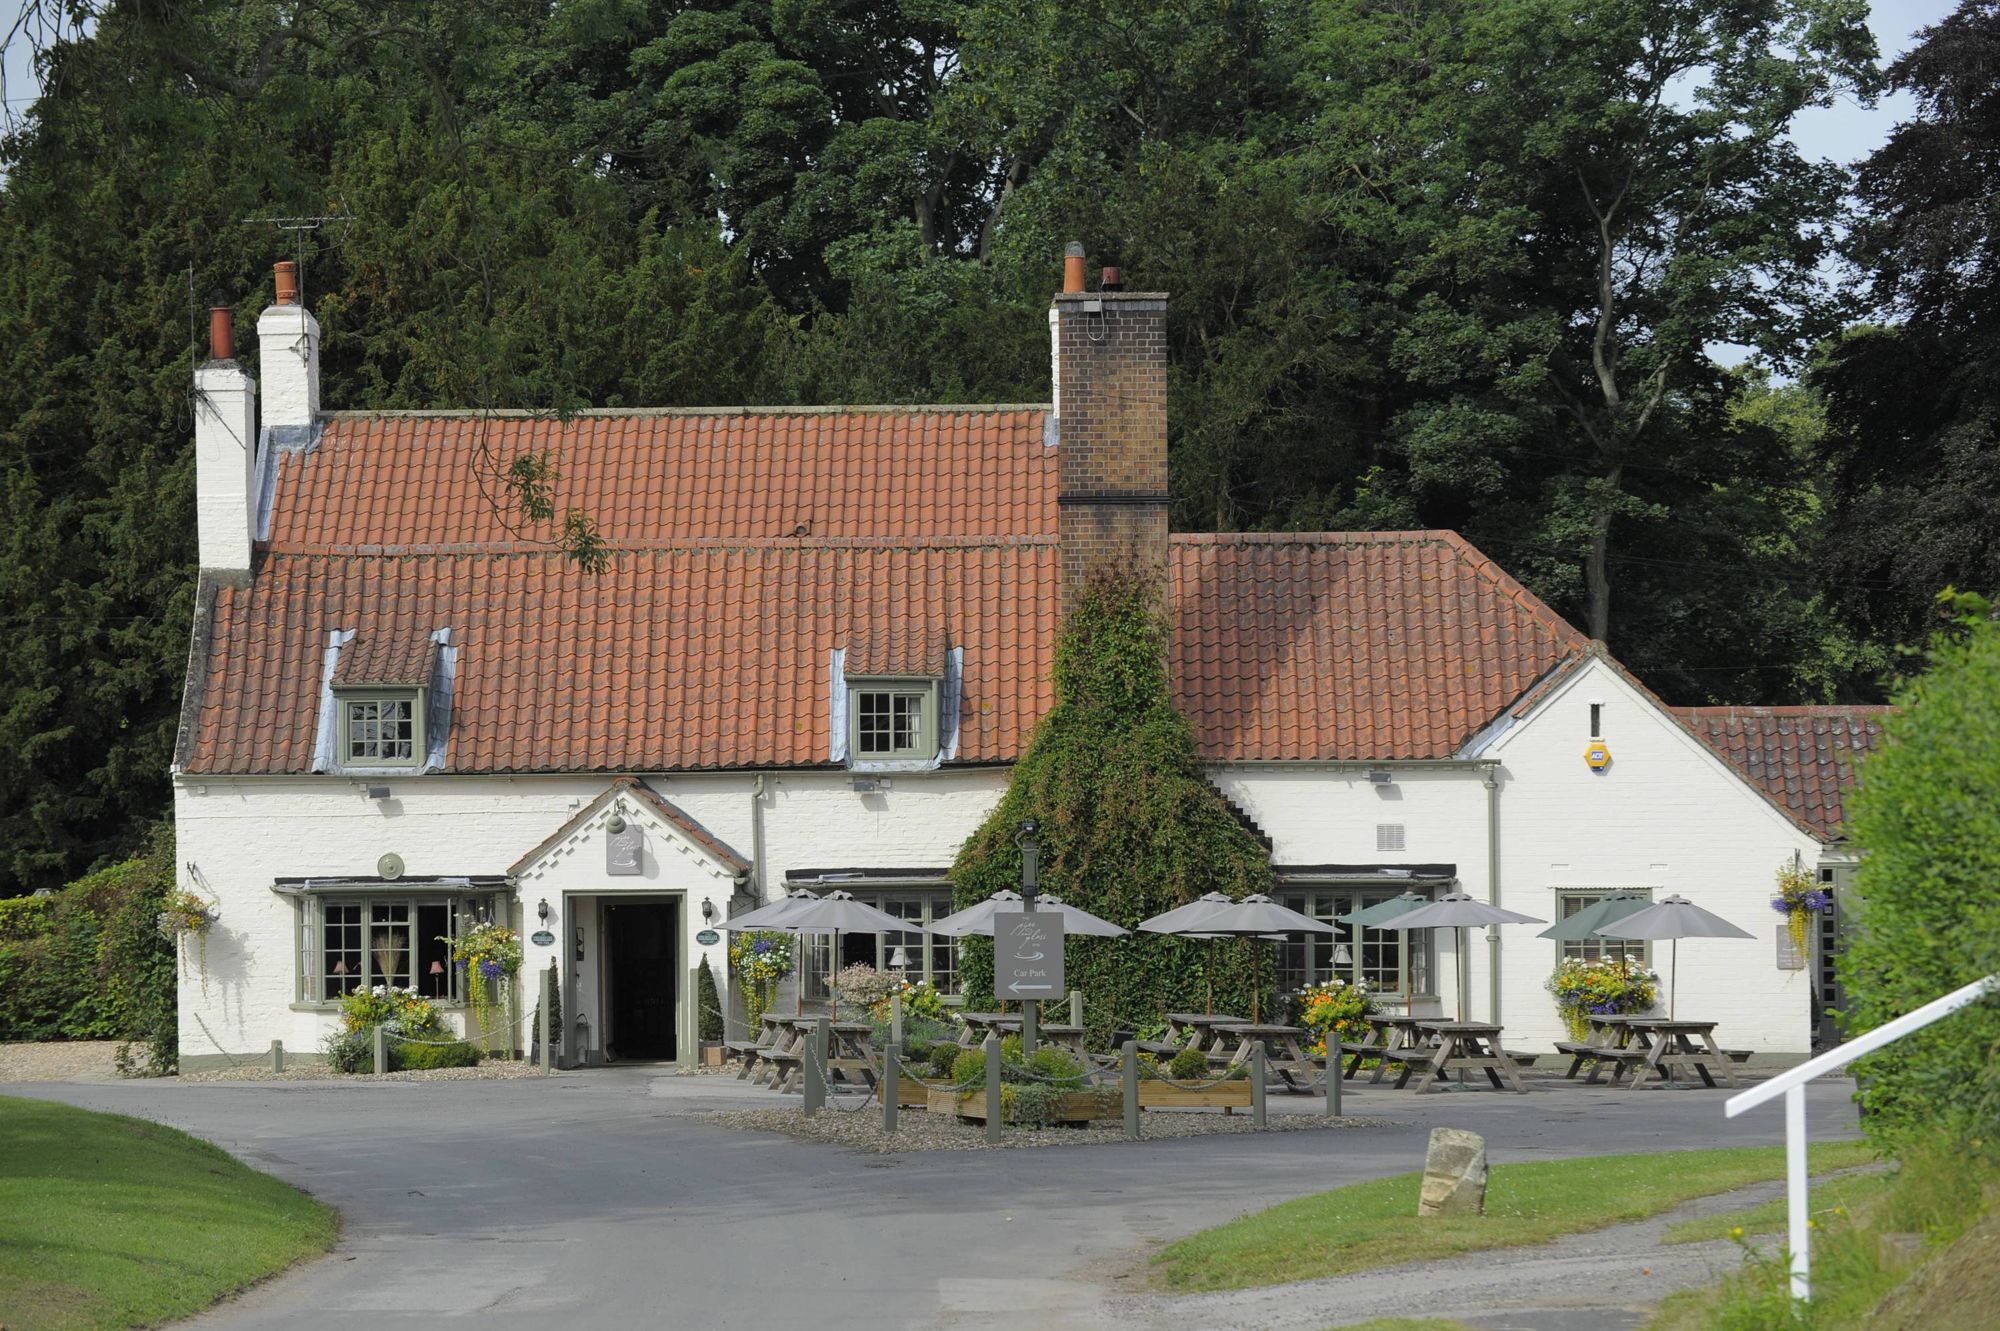 Hotels in East Riding of Yorkshire holidays at Cool Places